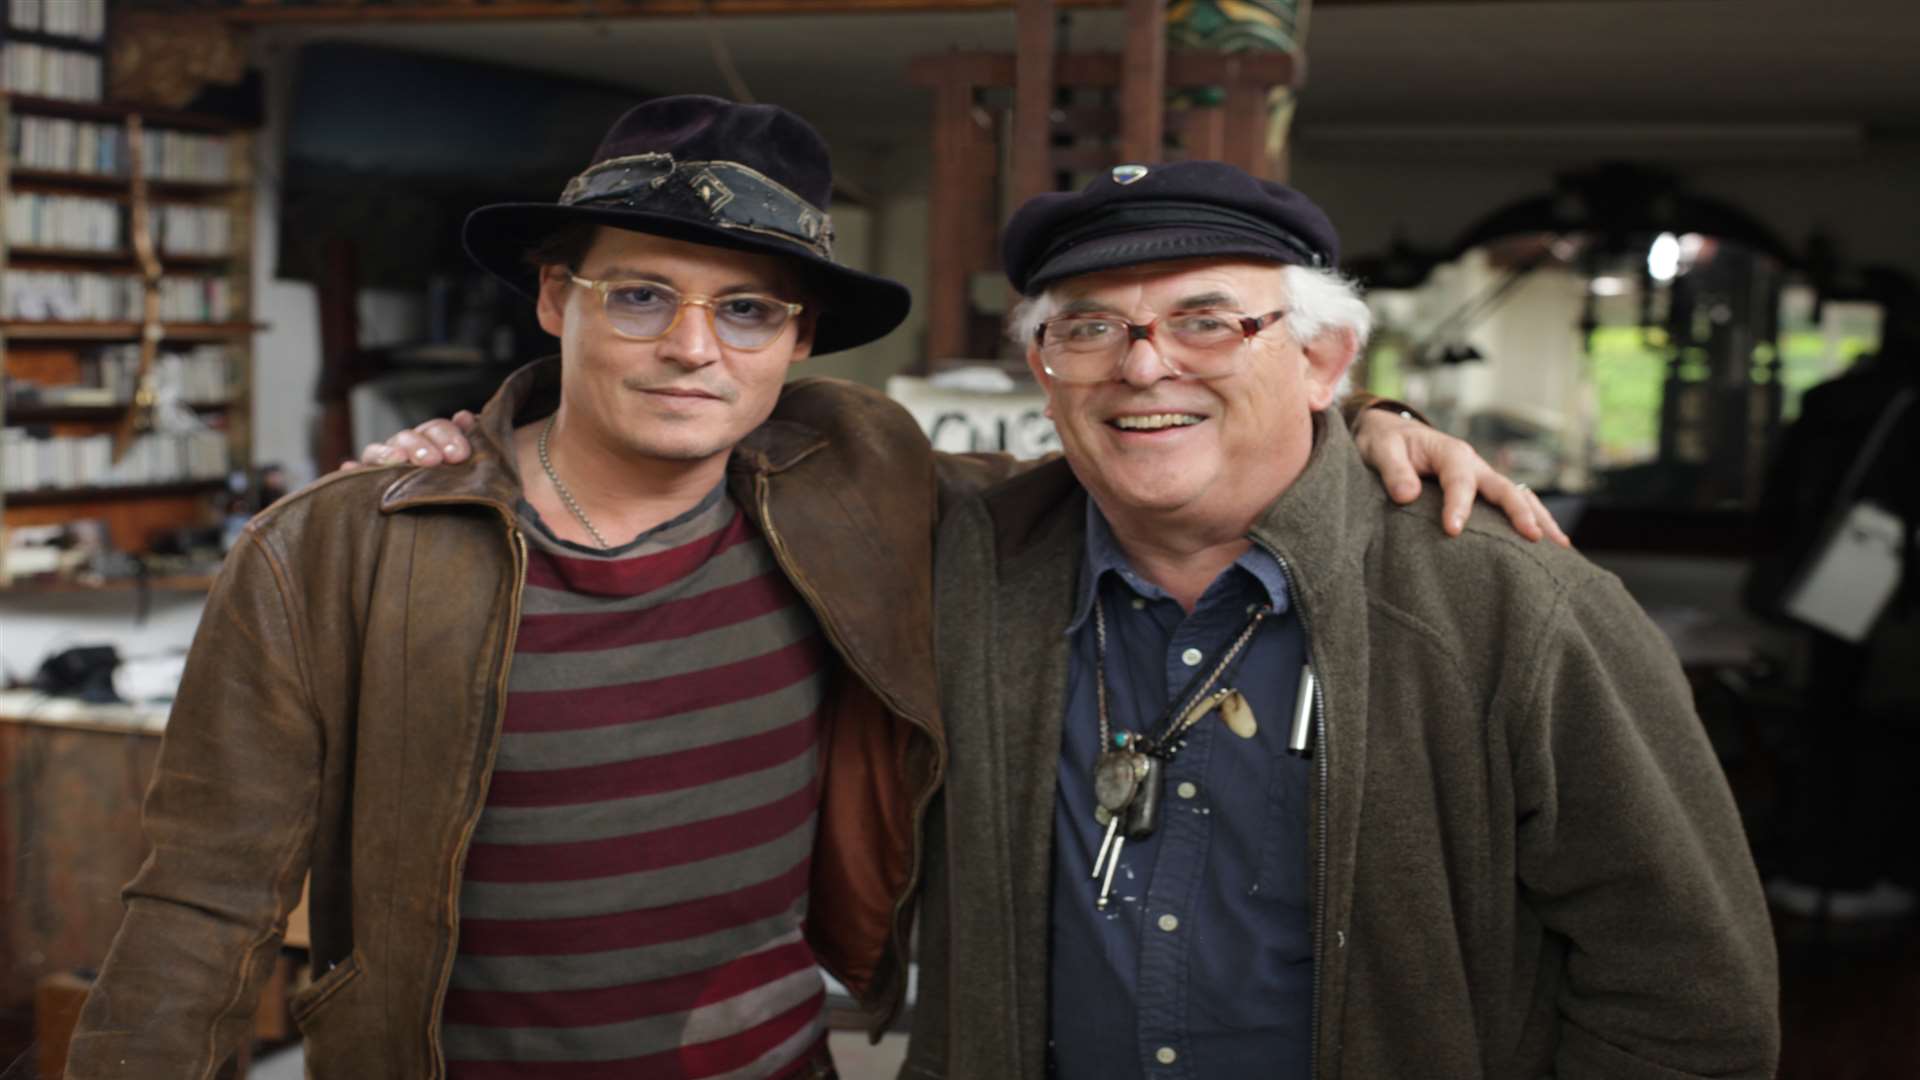 Johnny Depp, left, with Ralph Steadman, during the filming of For No Good Reason